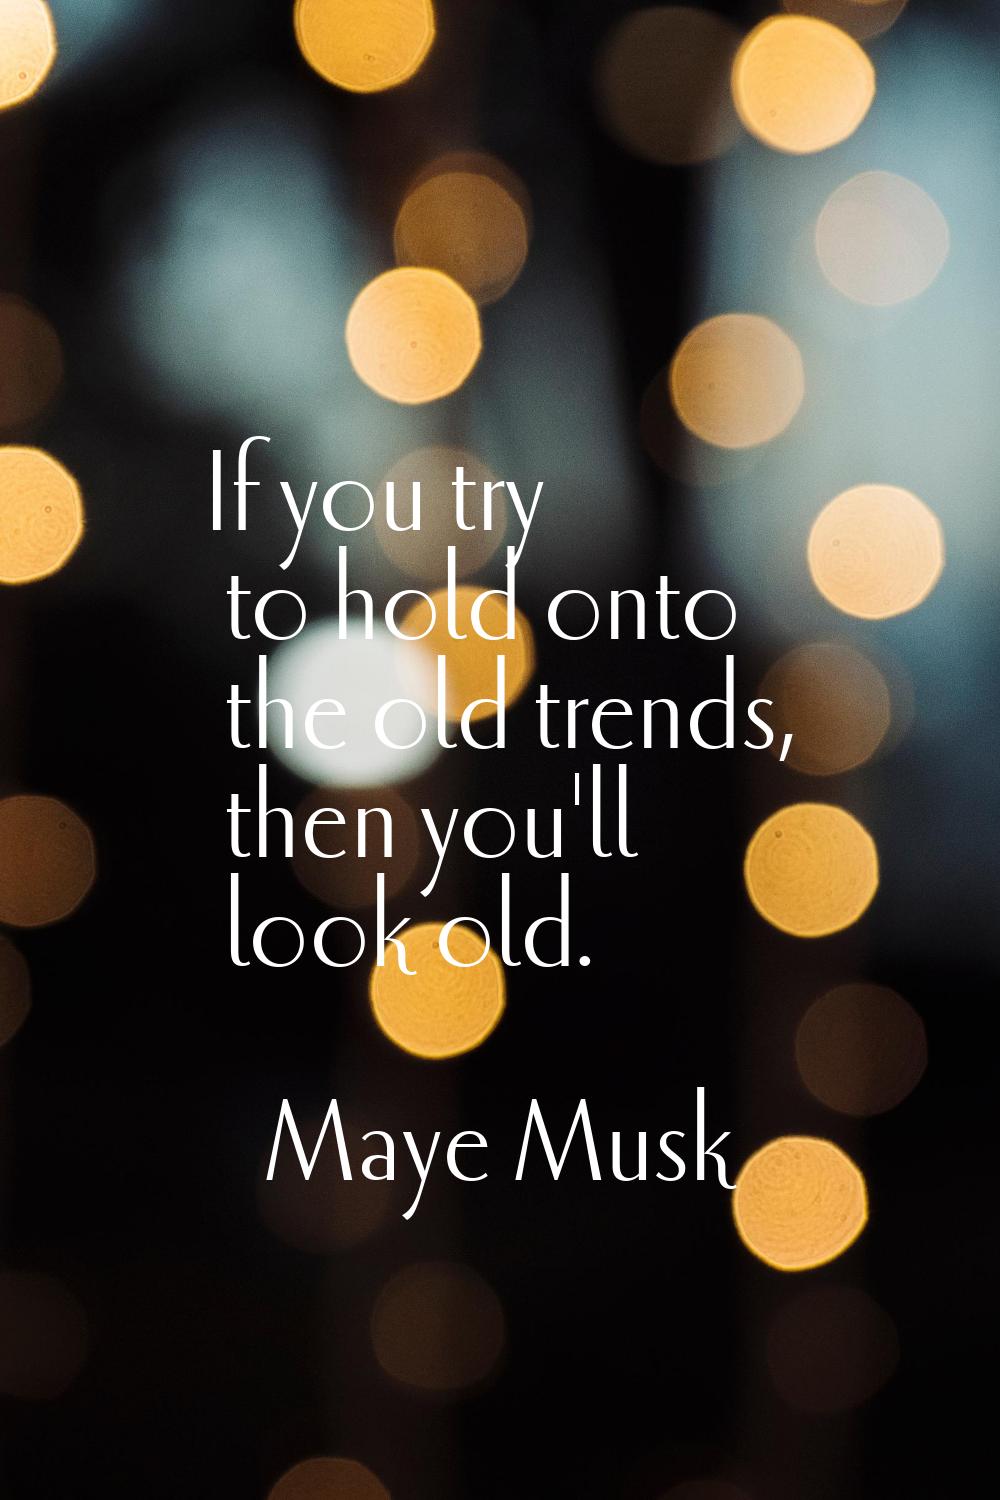 If you try to hold onto the old trends, then you'll look old.